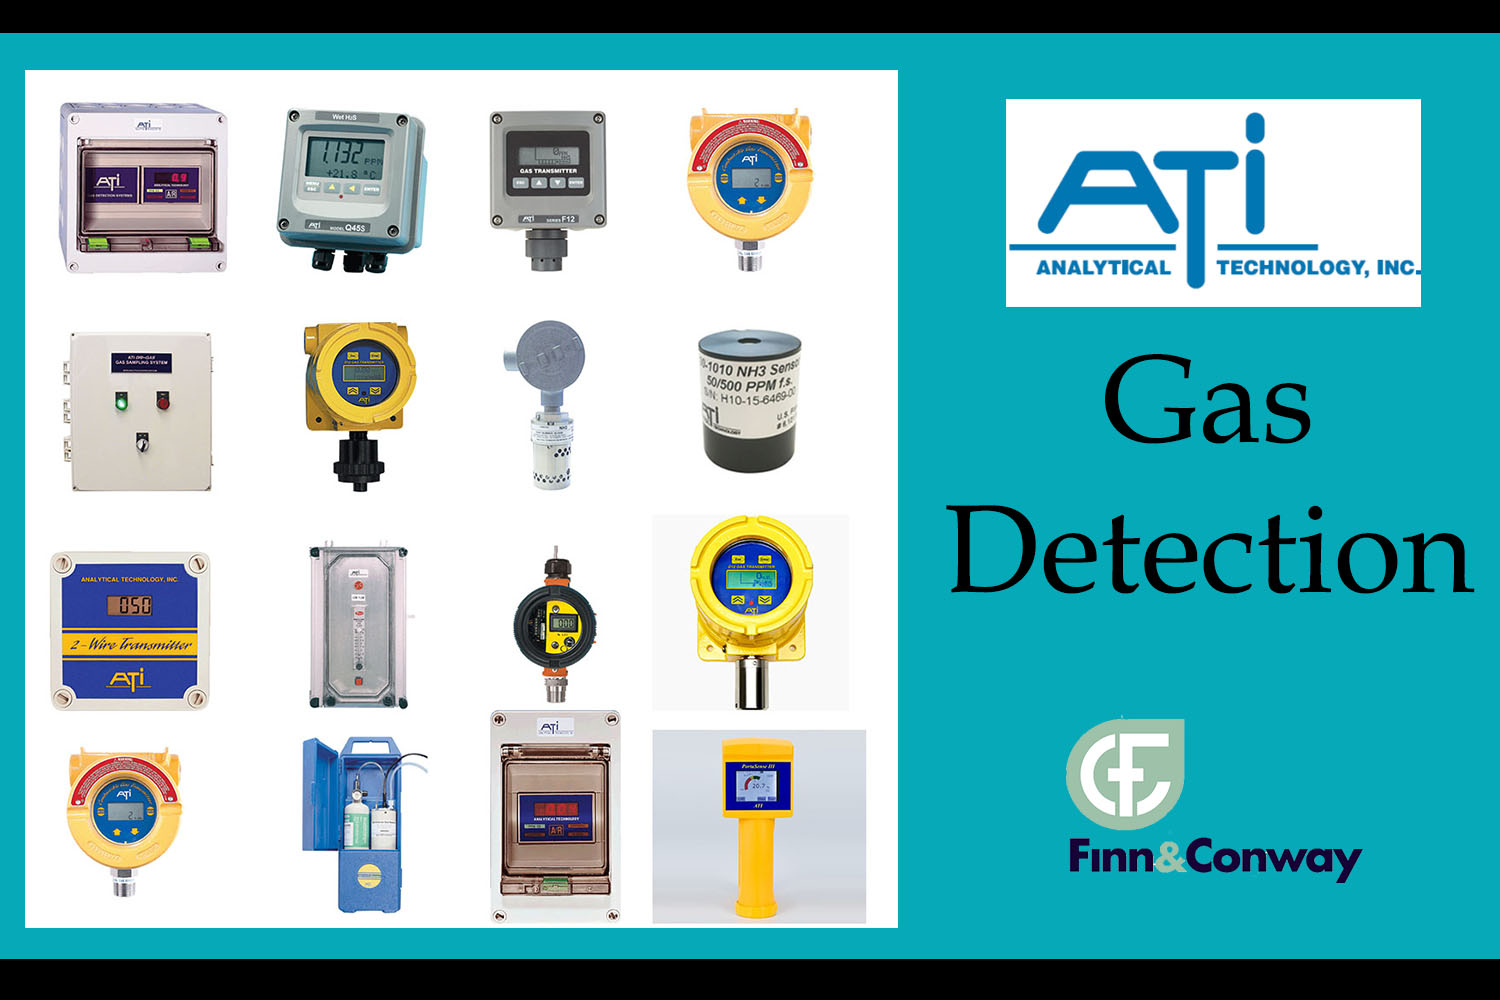 Gas Detection by Analytical Technology, Inc.